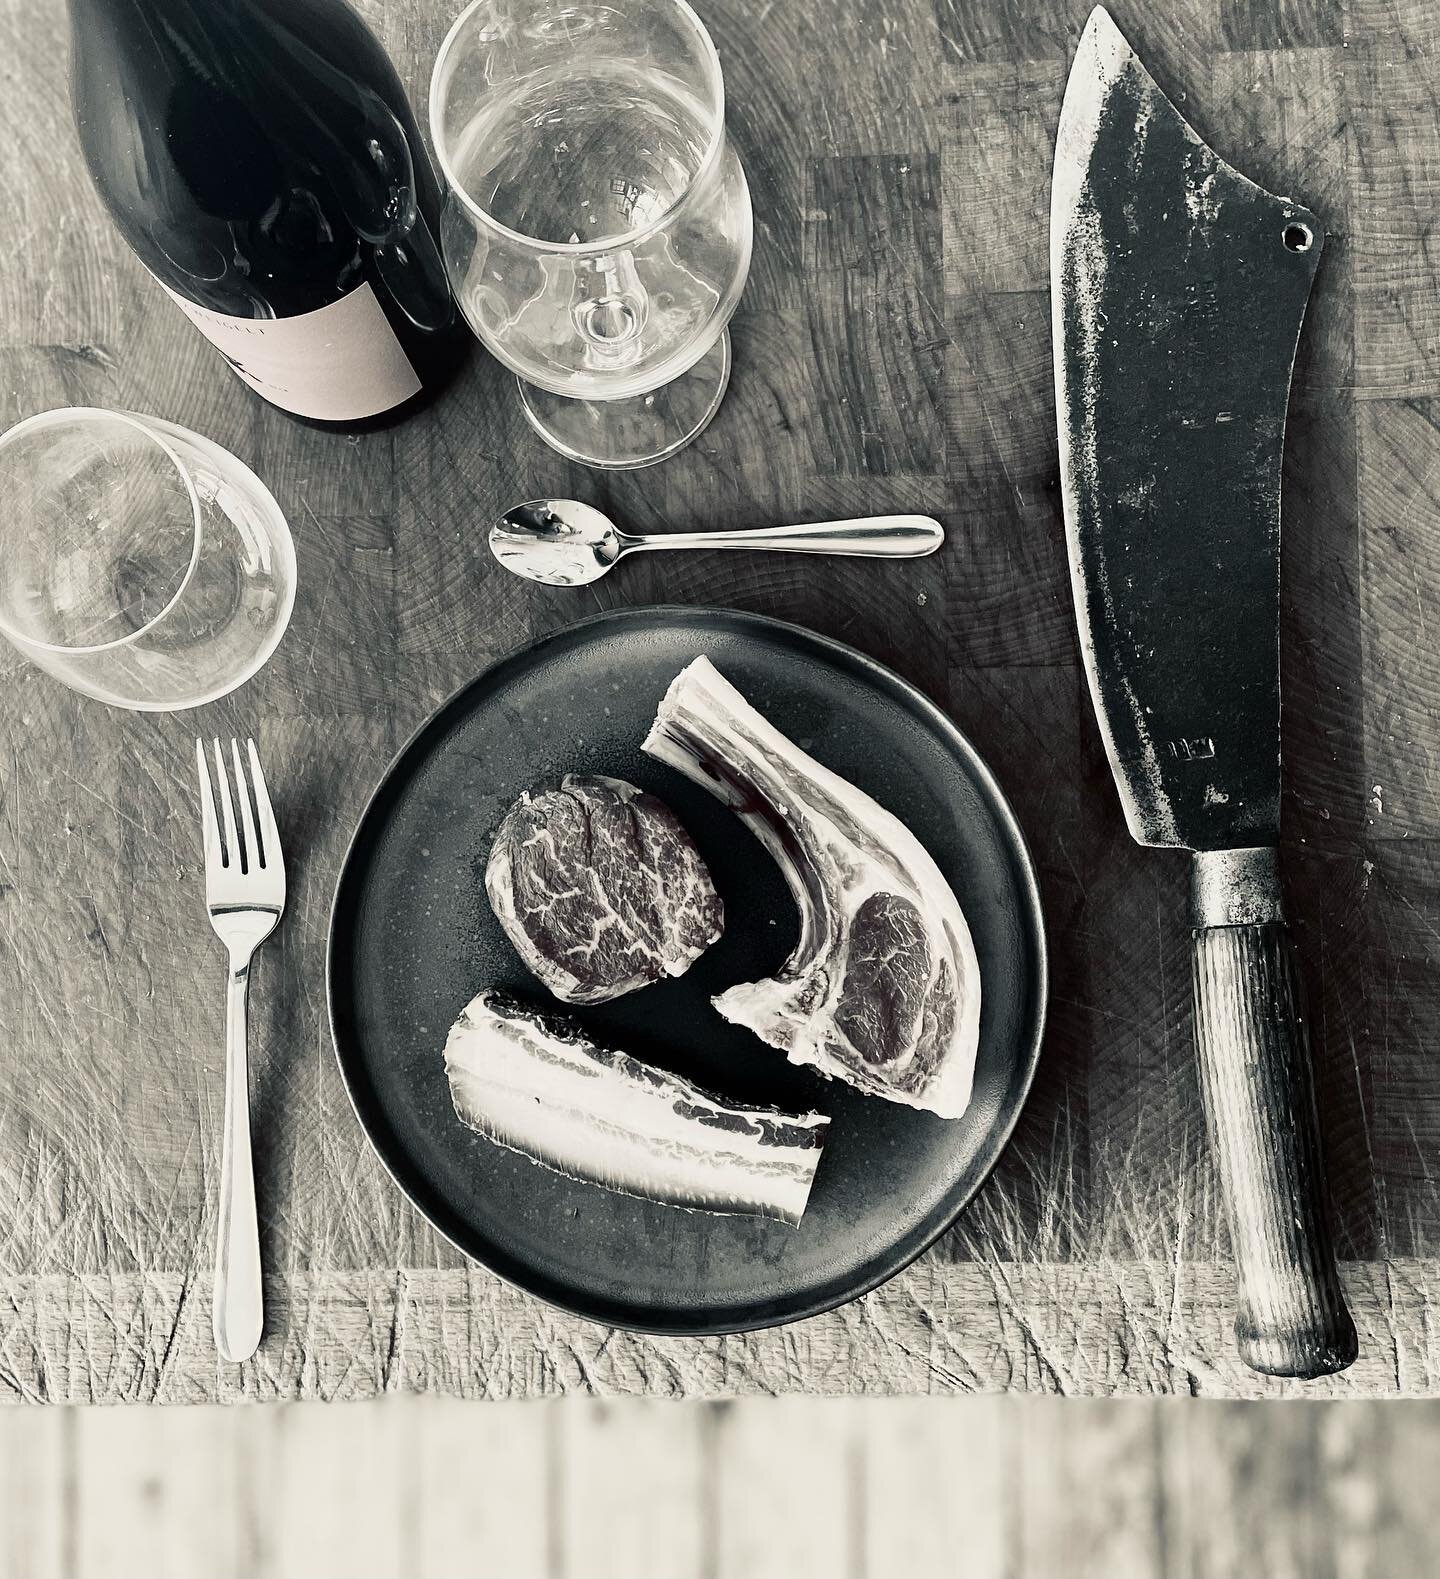 JOIN US AT THE BUTCHERS TABLE!
Join us for a very special one off immersive night on Wednesday 24th August where we celebrate some of our favourite cuts of meat with you, through a tasting menu and live butchery demonstration. This is an exclusive ev